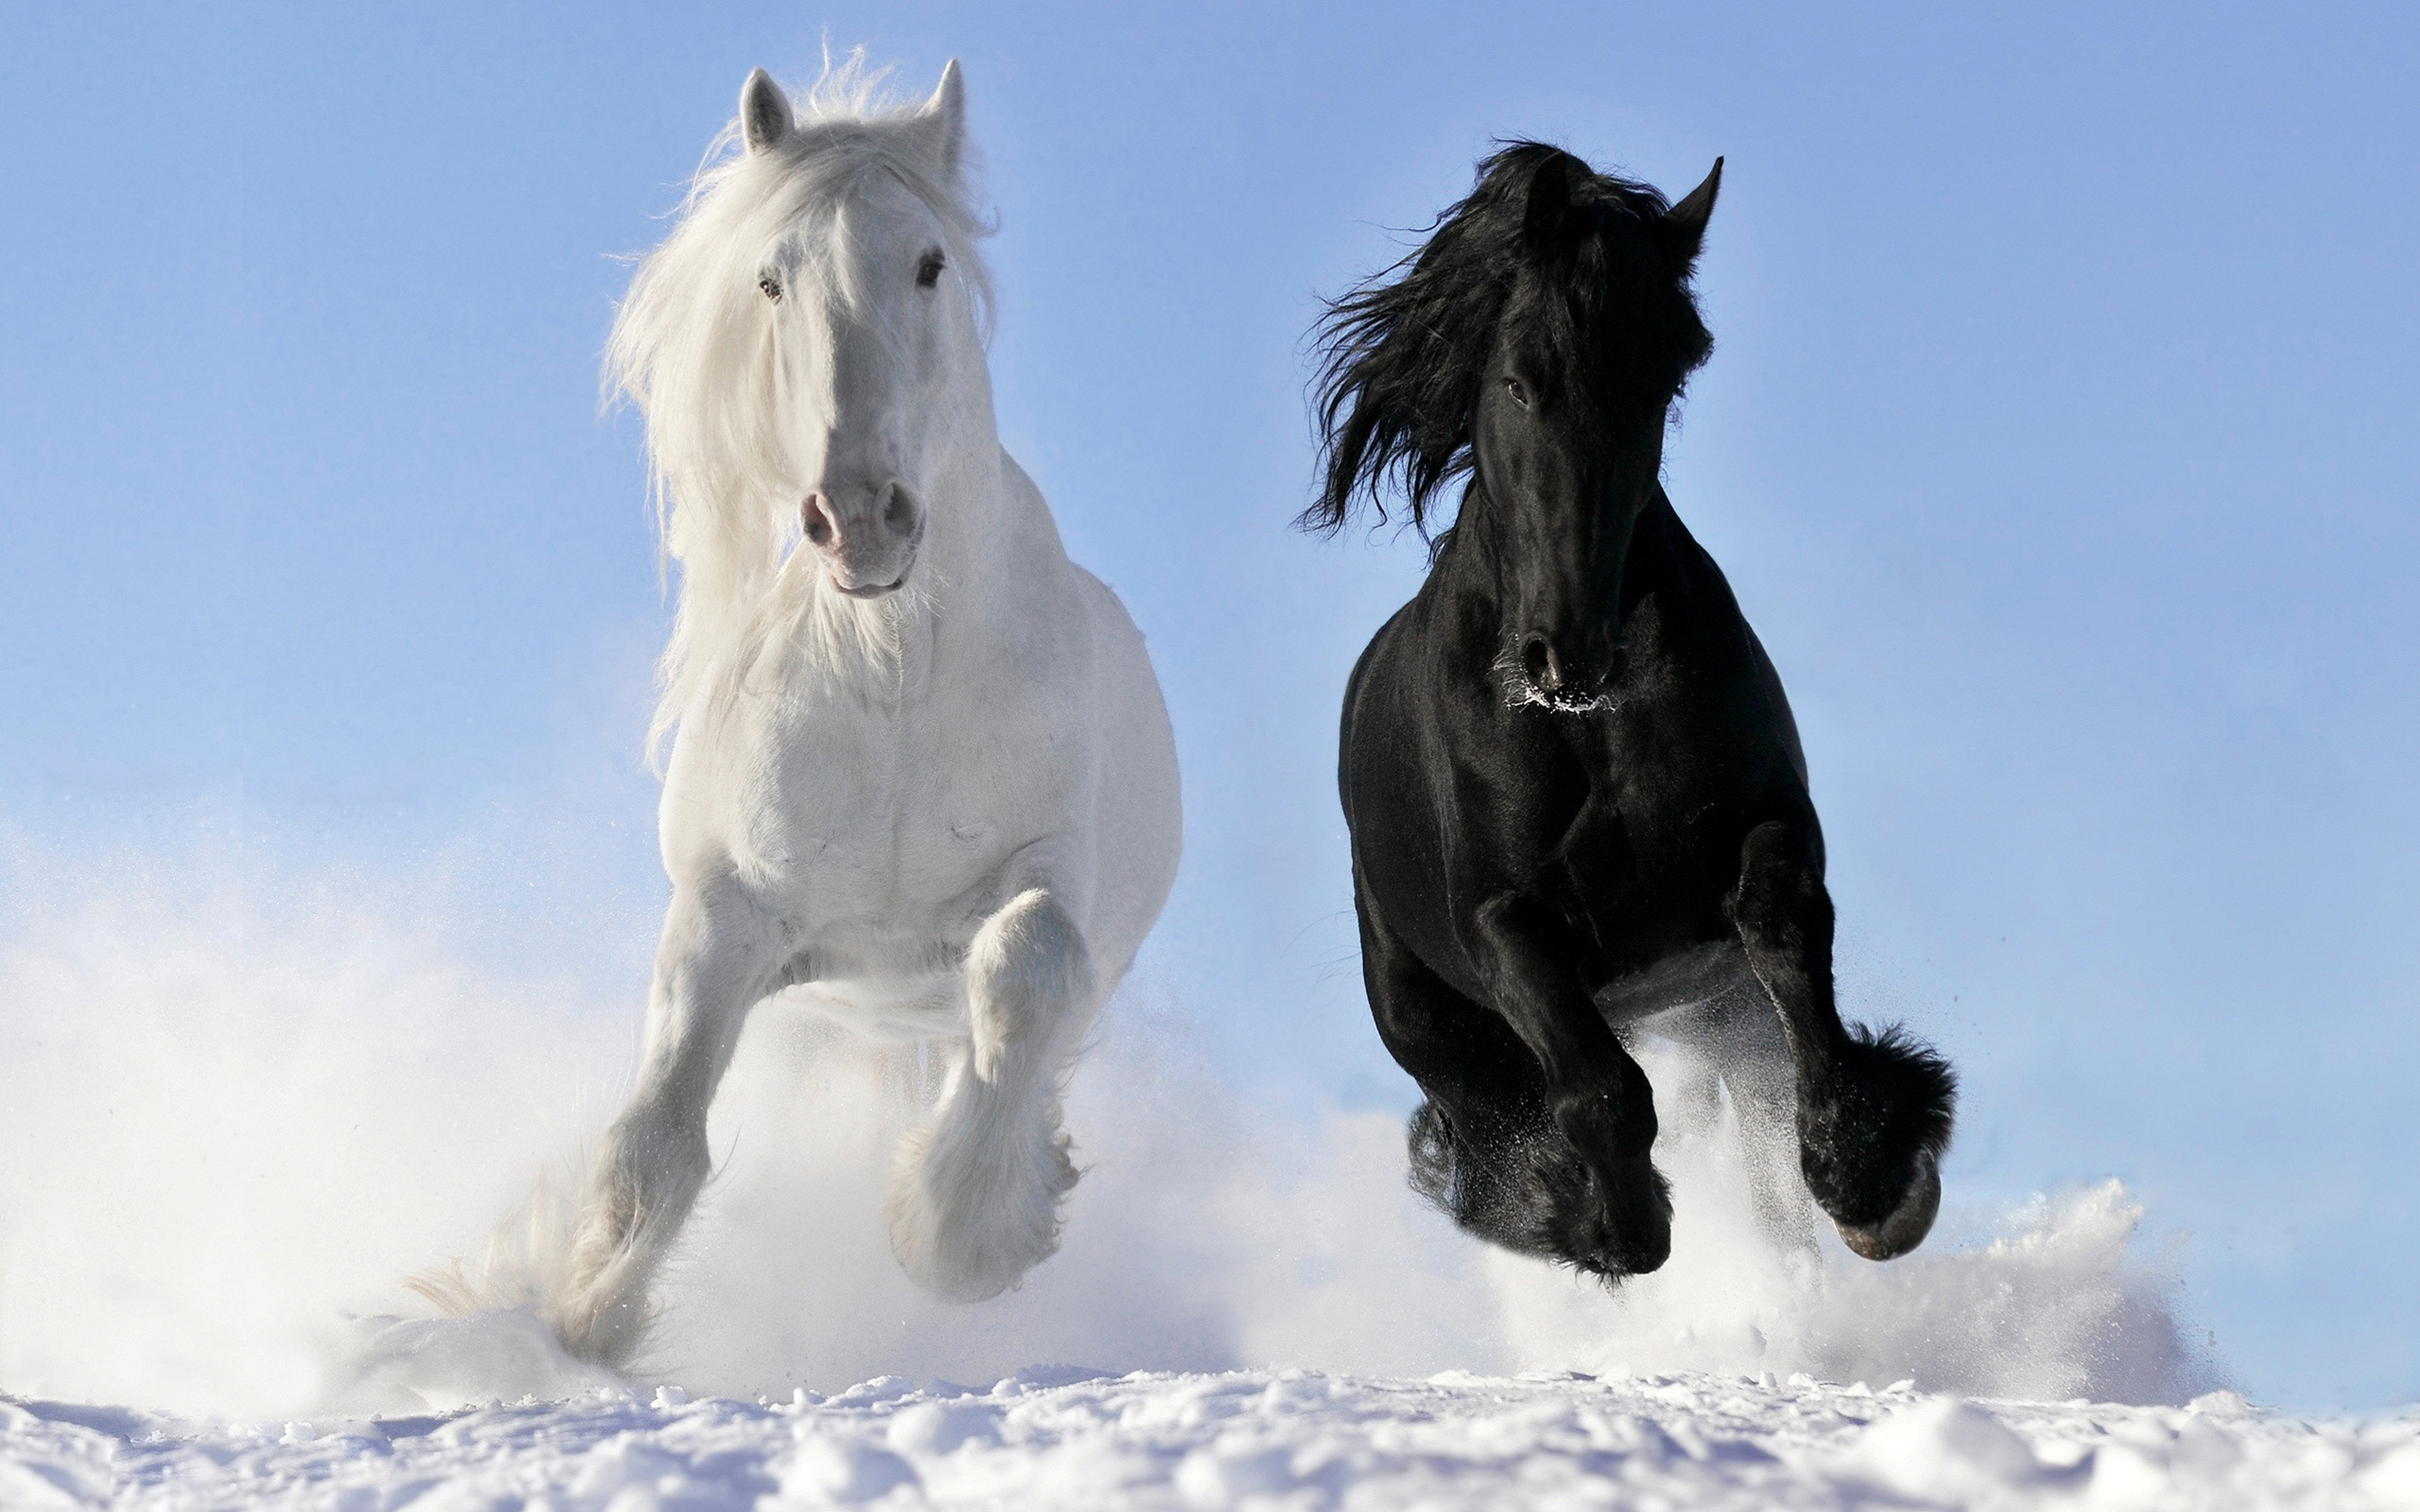 Black And White Horse 3840x2400 Hd Wallpaper : Wallpapers13.com